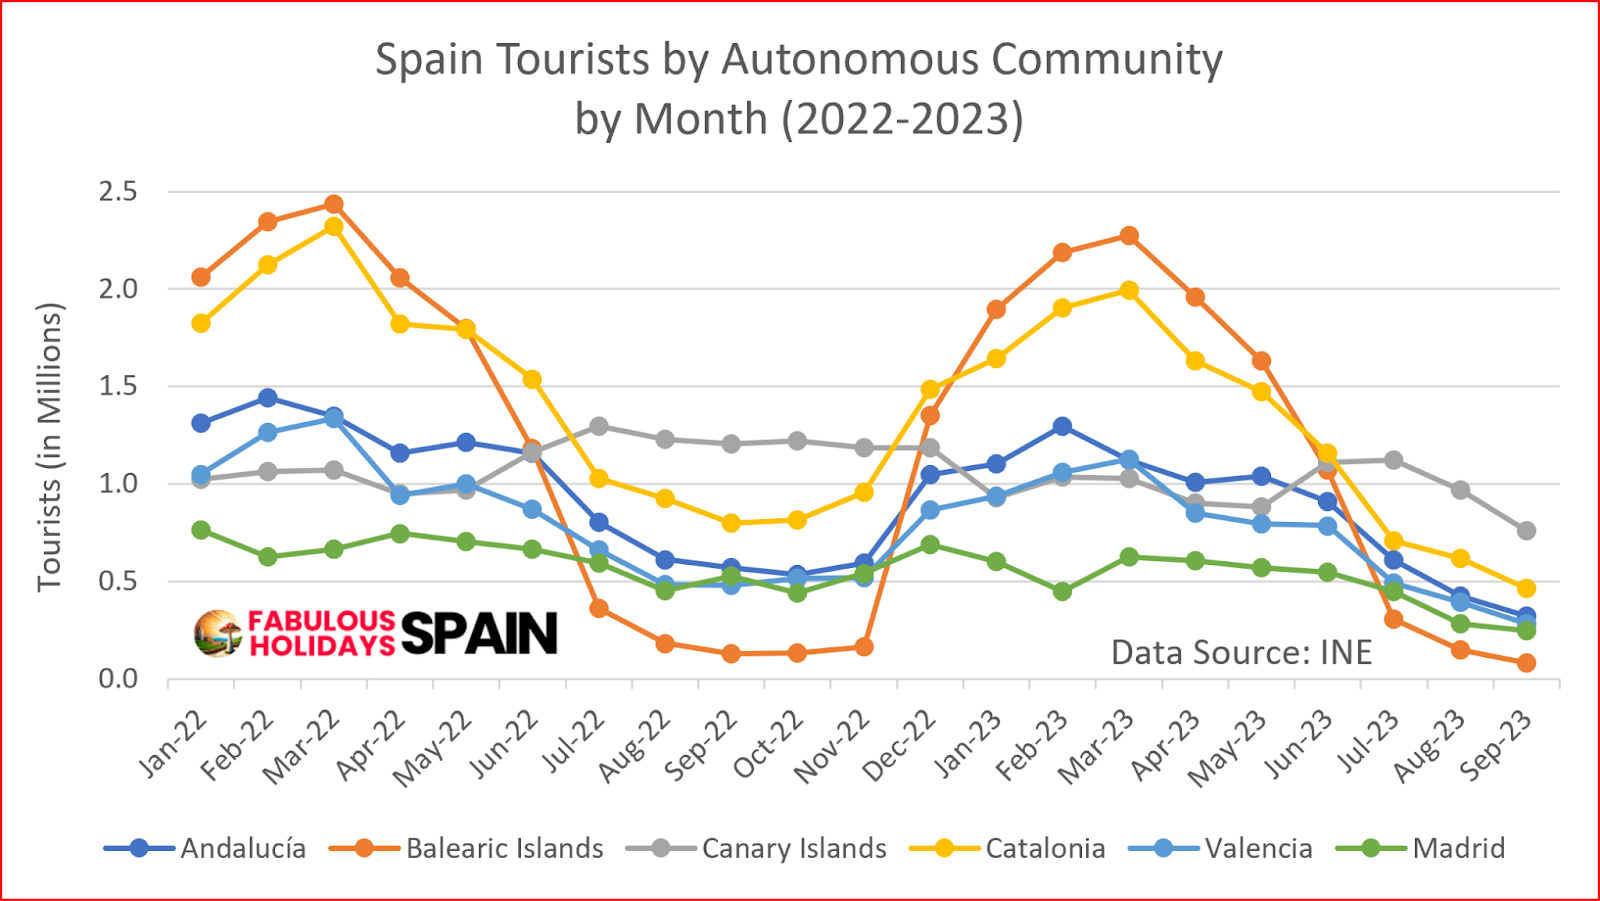 International tourist arrivals in millions in Spain by autonomous community for the period of January 2022 to September 2023.